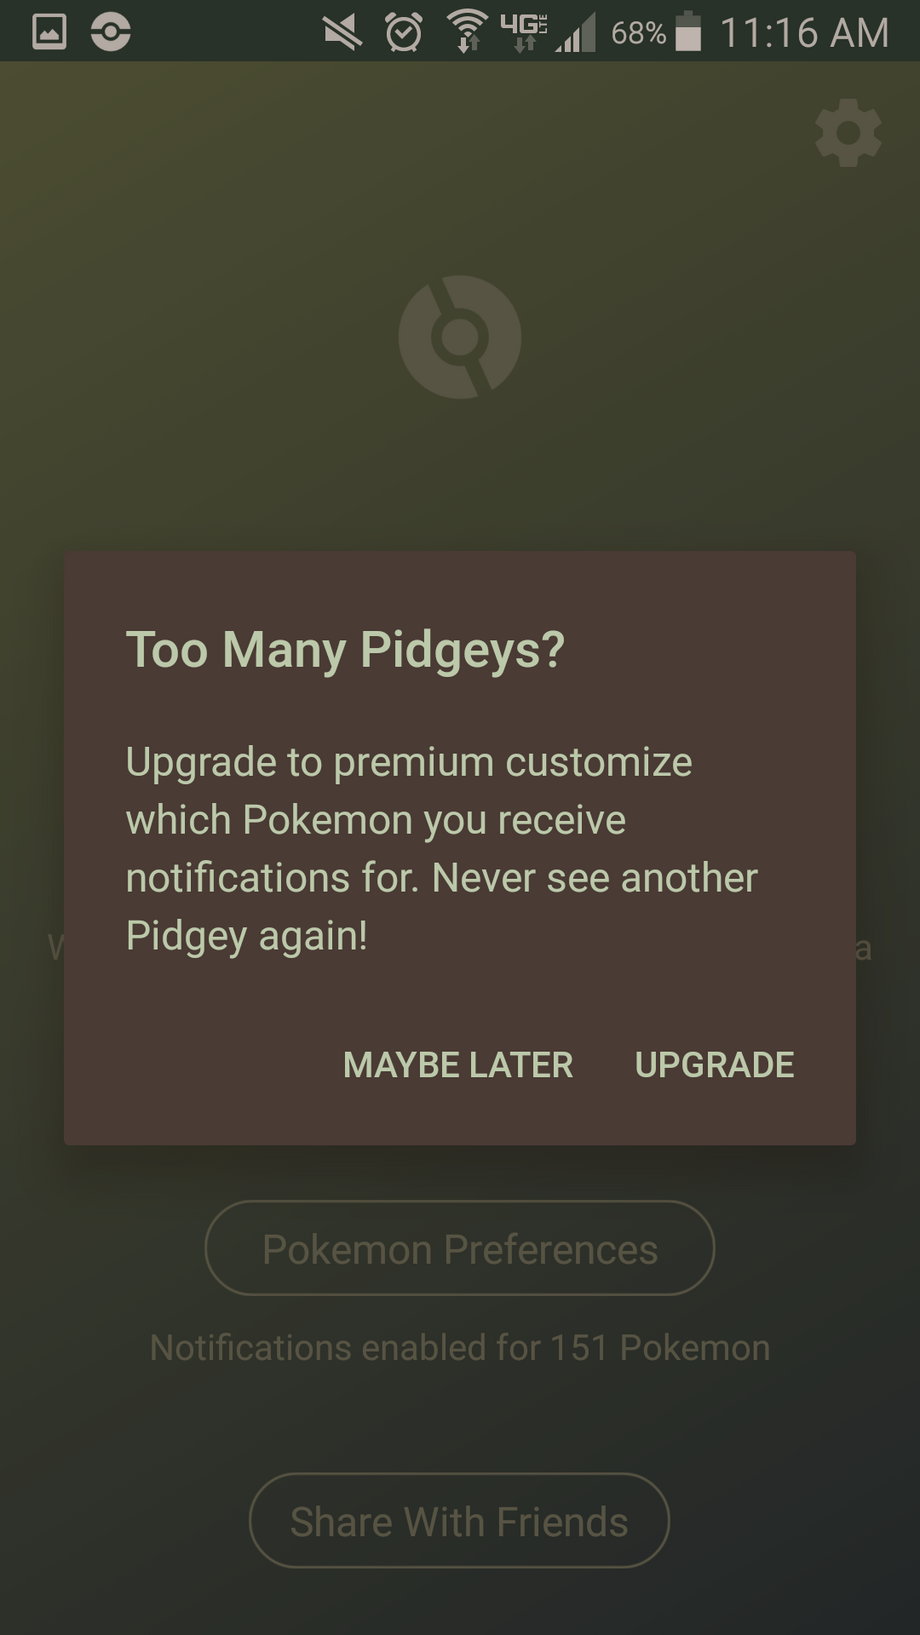 Apps like PokeDetector charge for premium services, another no-no according to the terms of service.